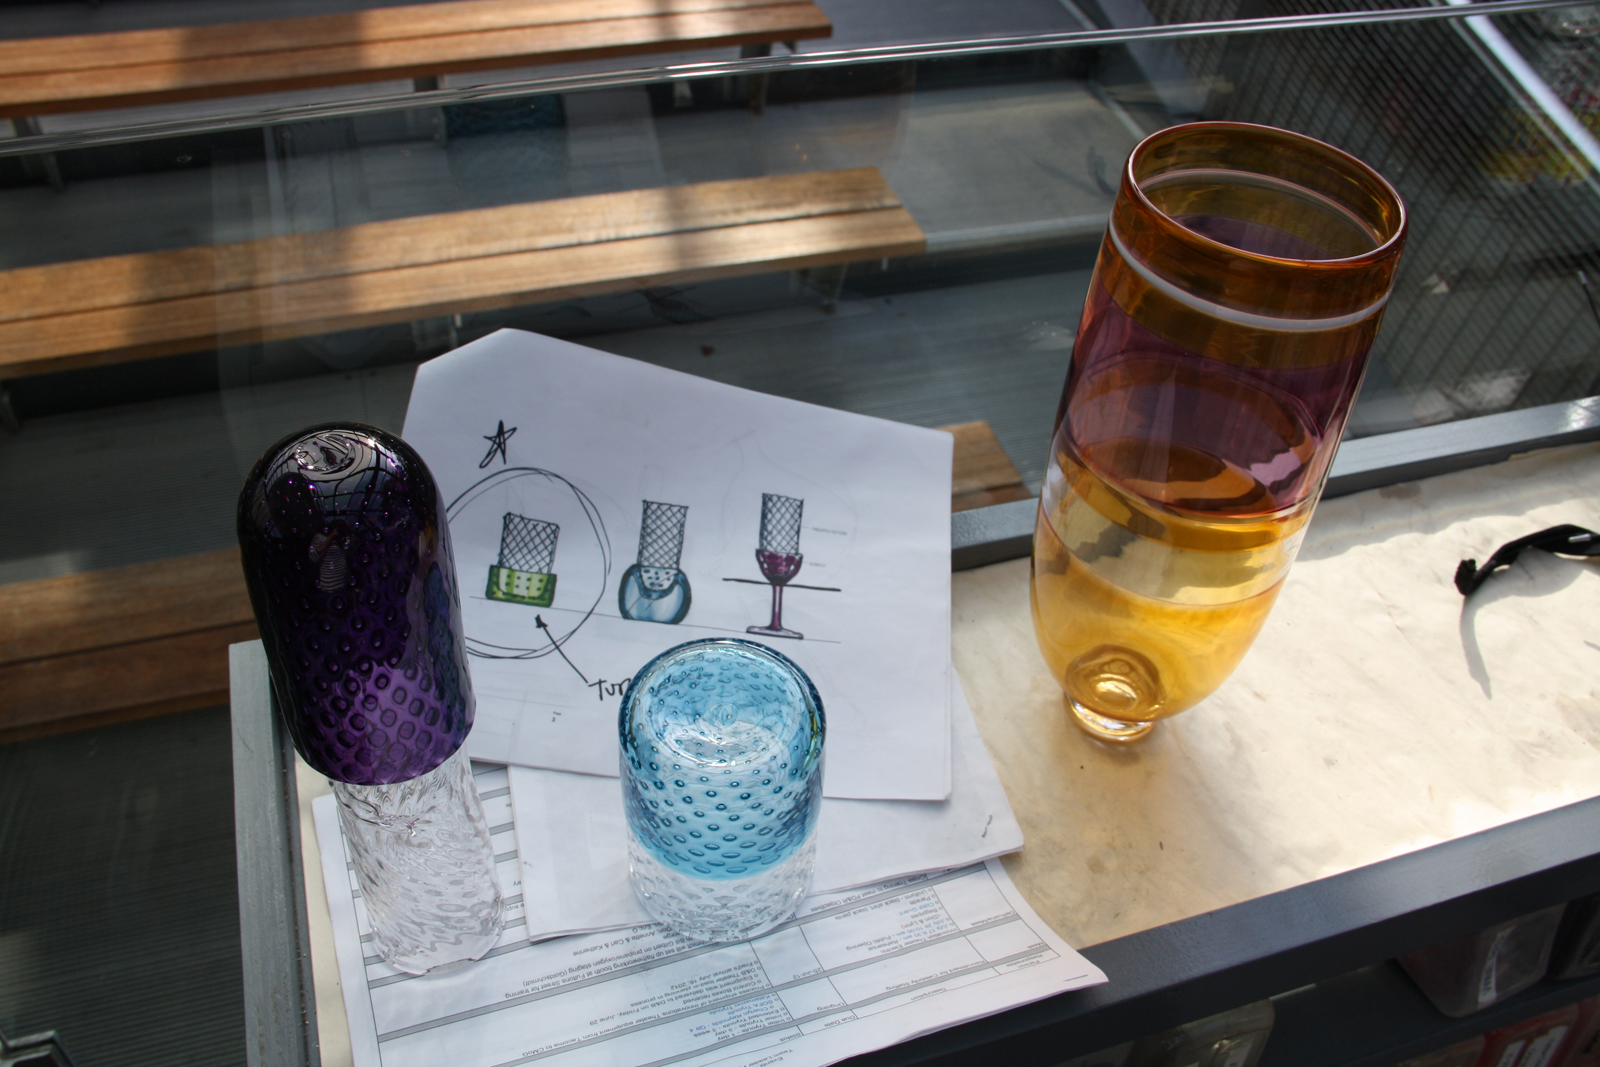 Prototypes and design drawings by Harry Allen and Chris Hacker for their GlassLab design session.